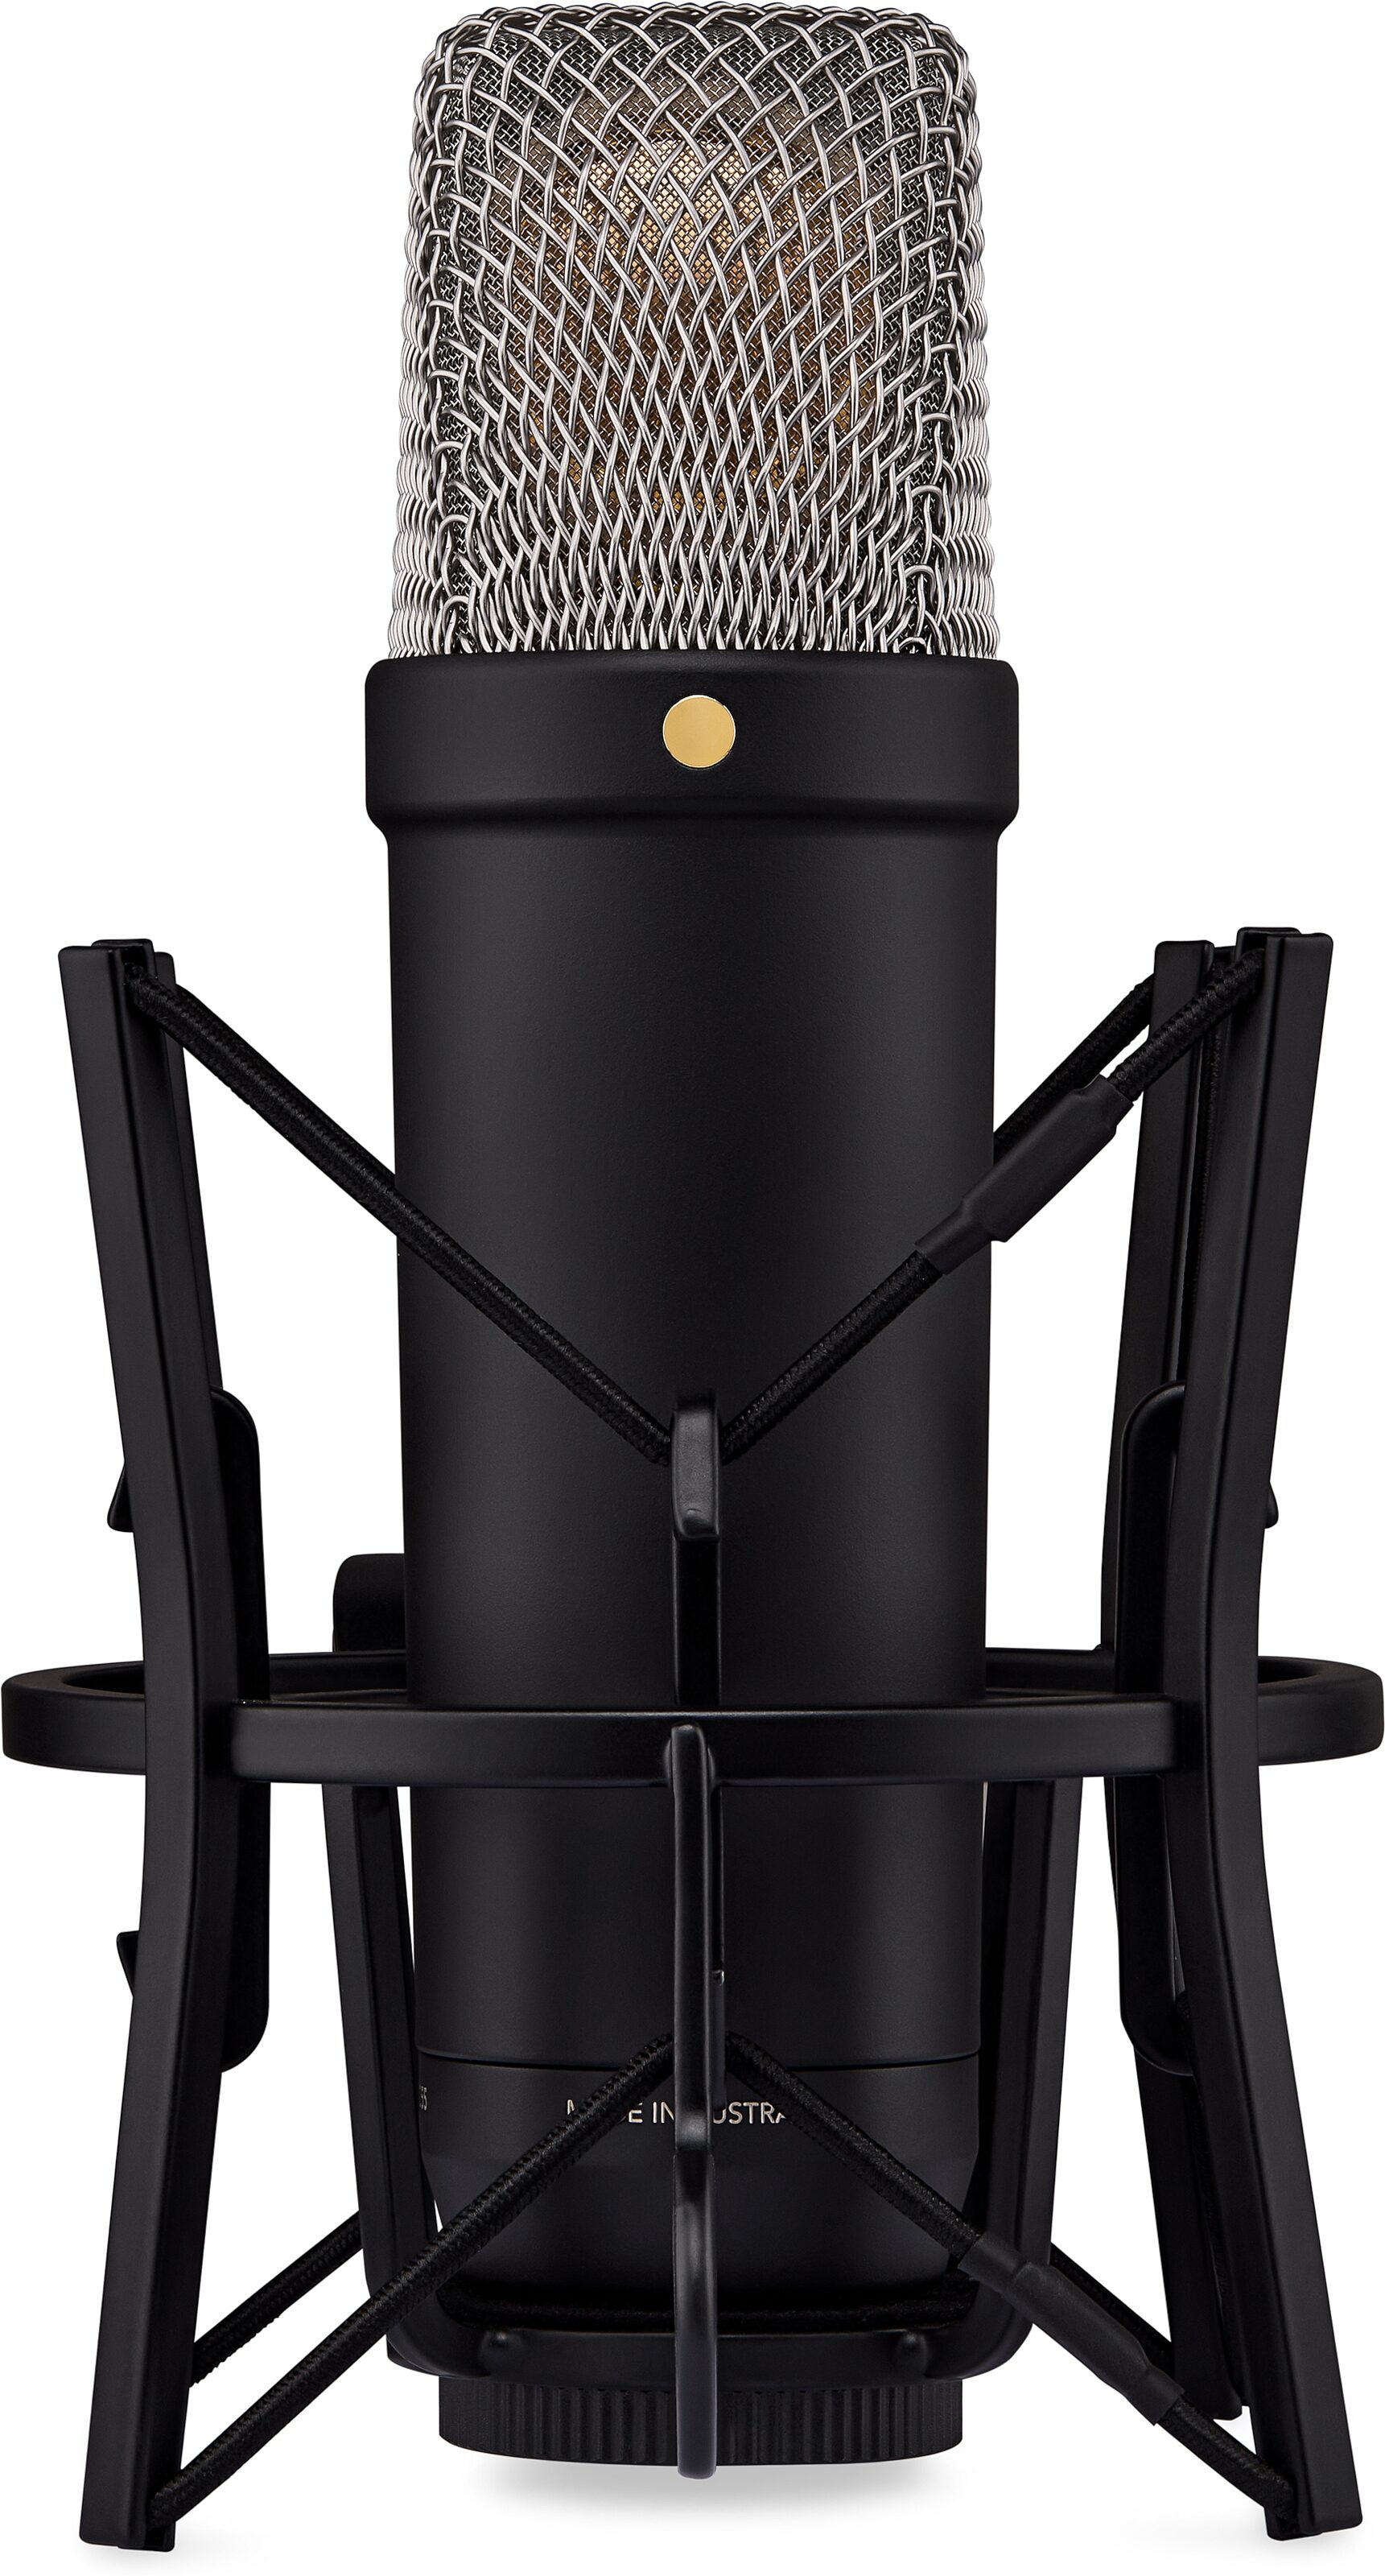 Rode NT1 5th Generation Hybrid USB Condenser Microphone | zZounds